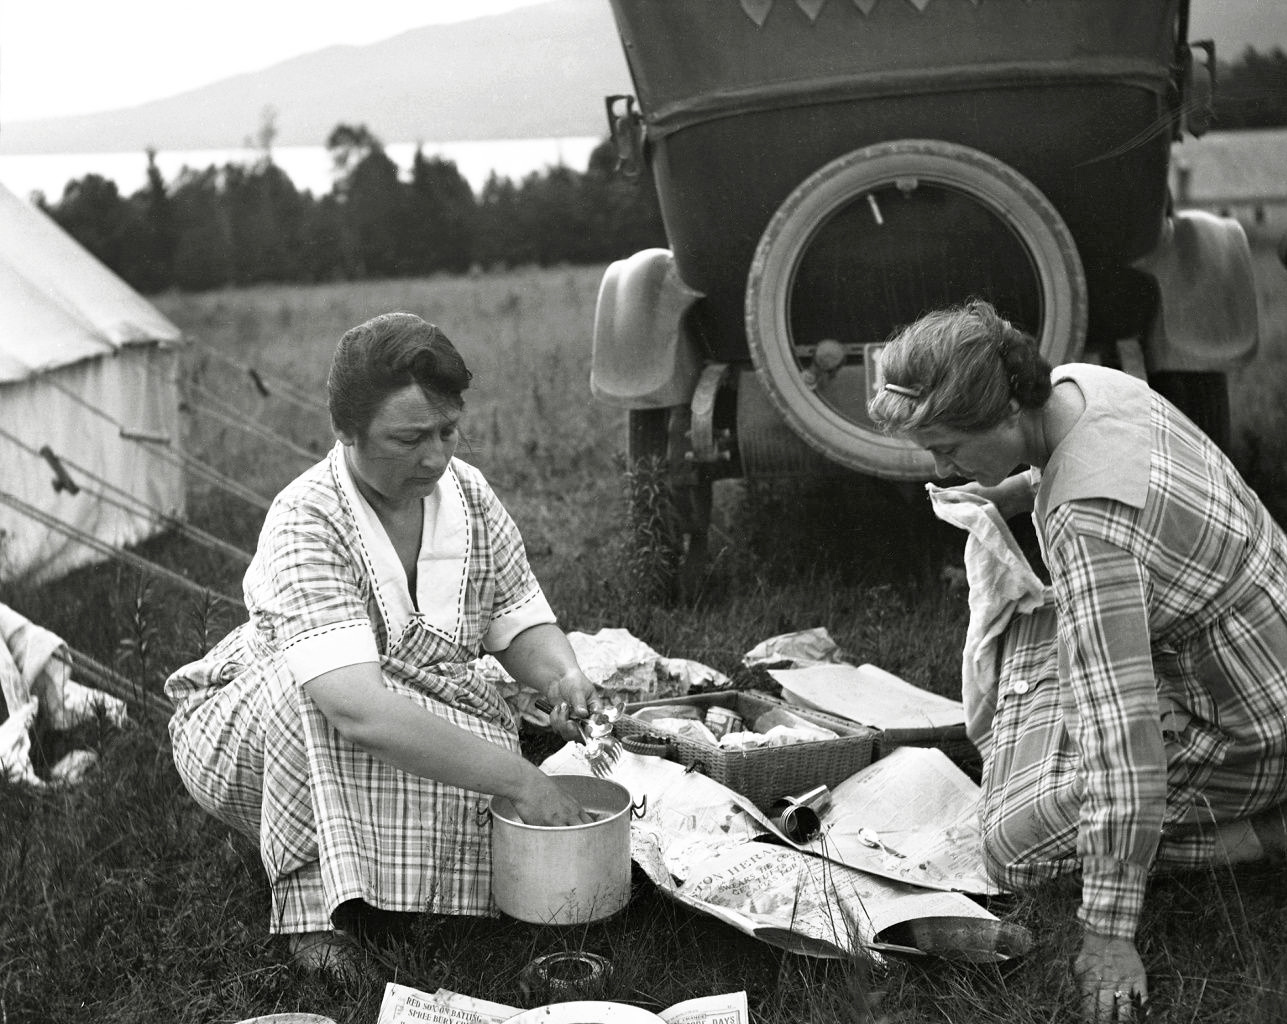 Roughing it out on a camping trip, late teens, early 1920's. From my negatives collection. View full size.

[I'd say late-20s at the earliest. -tterrace]